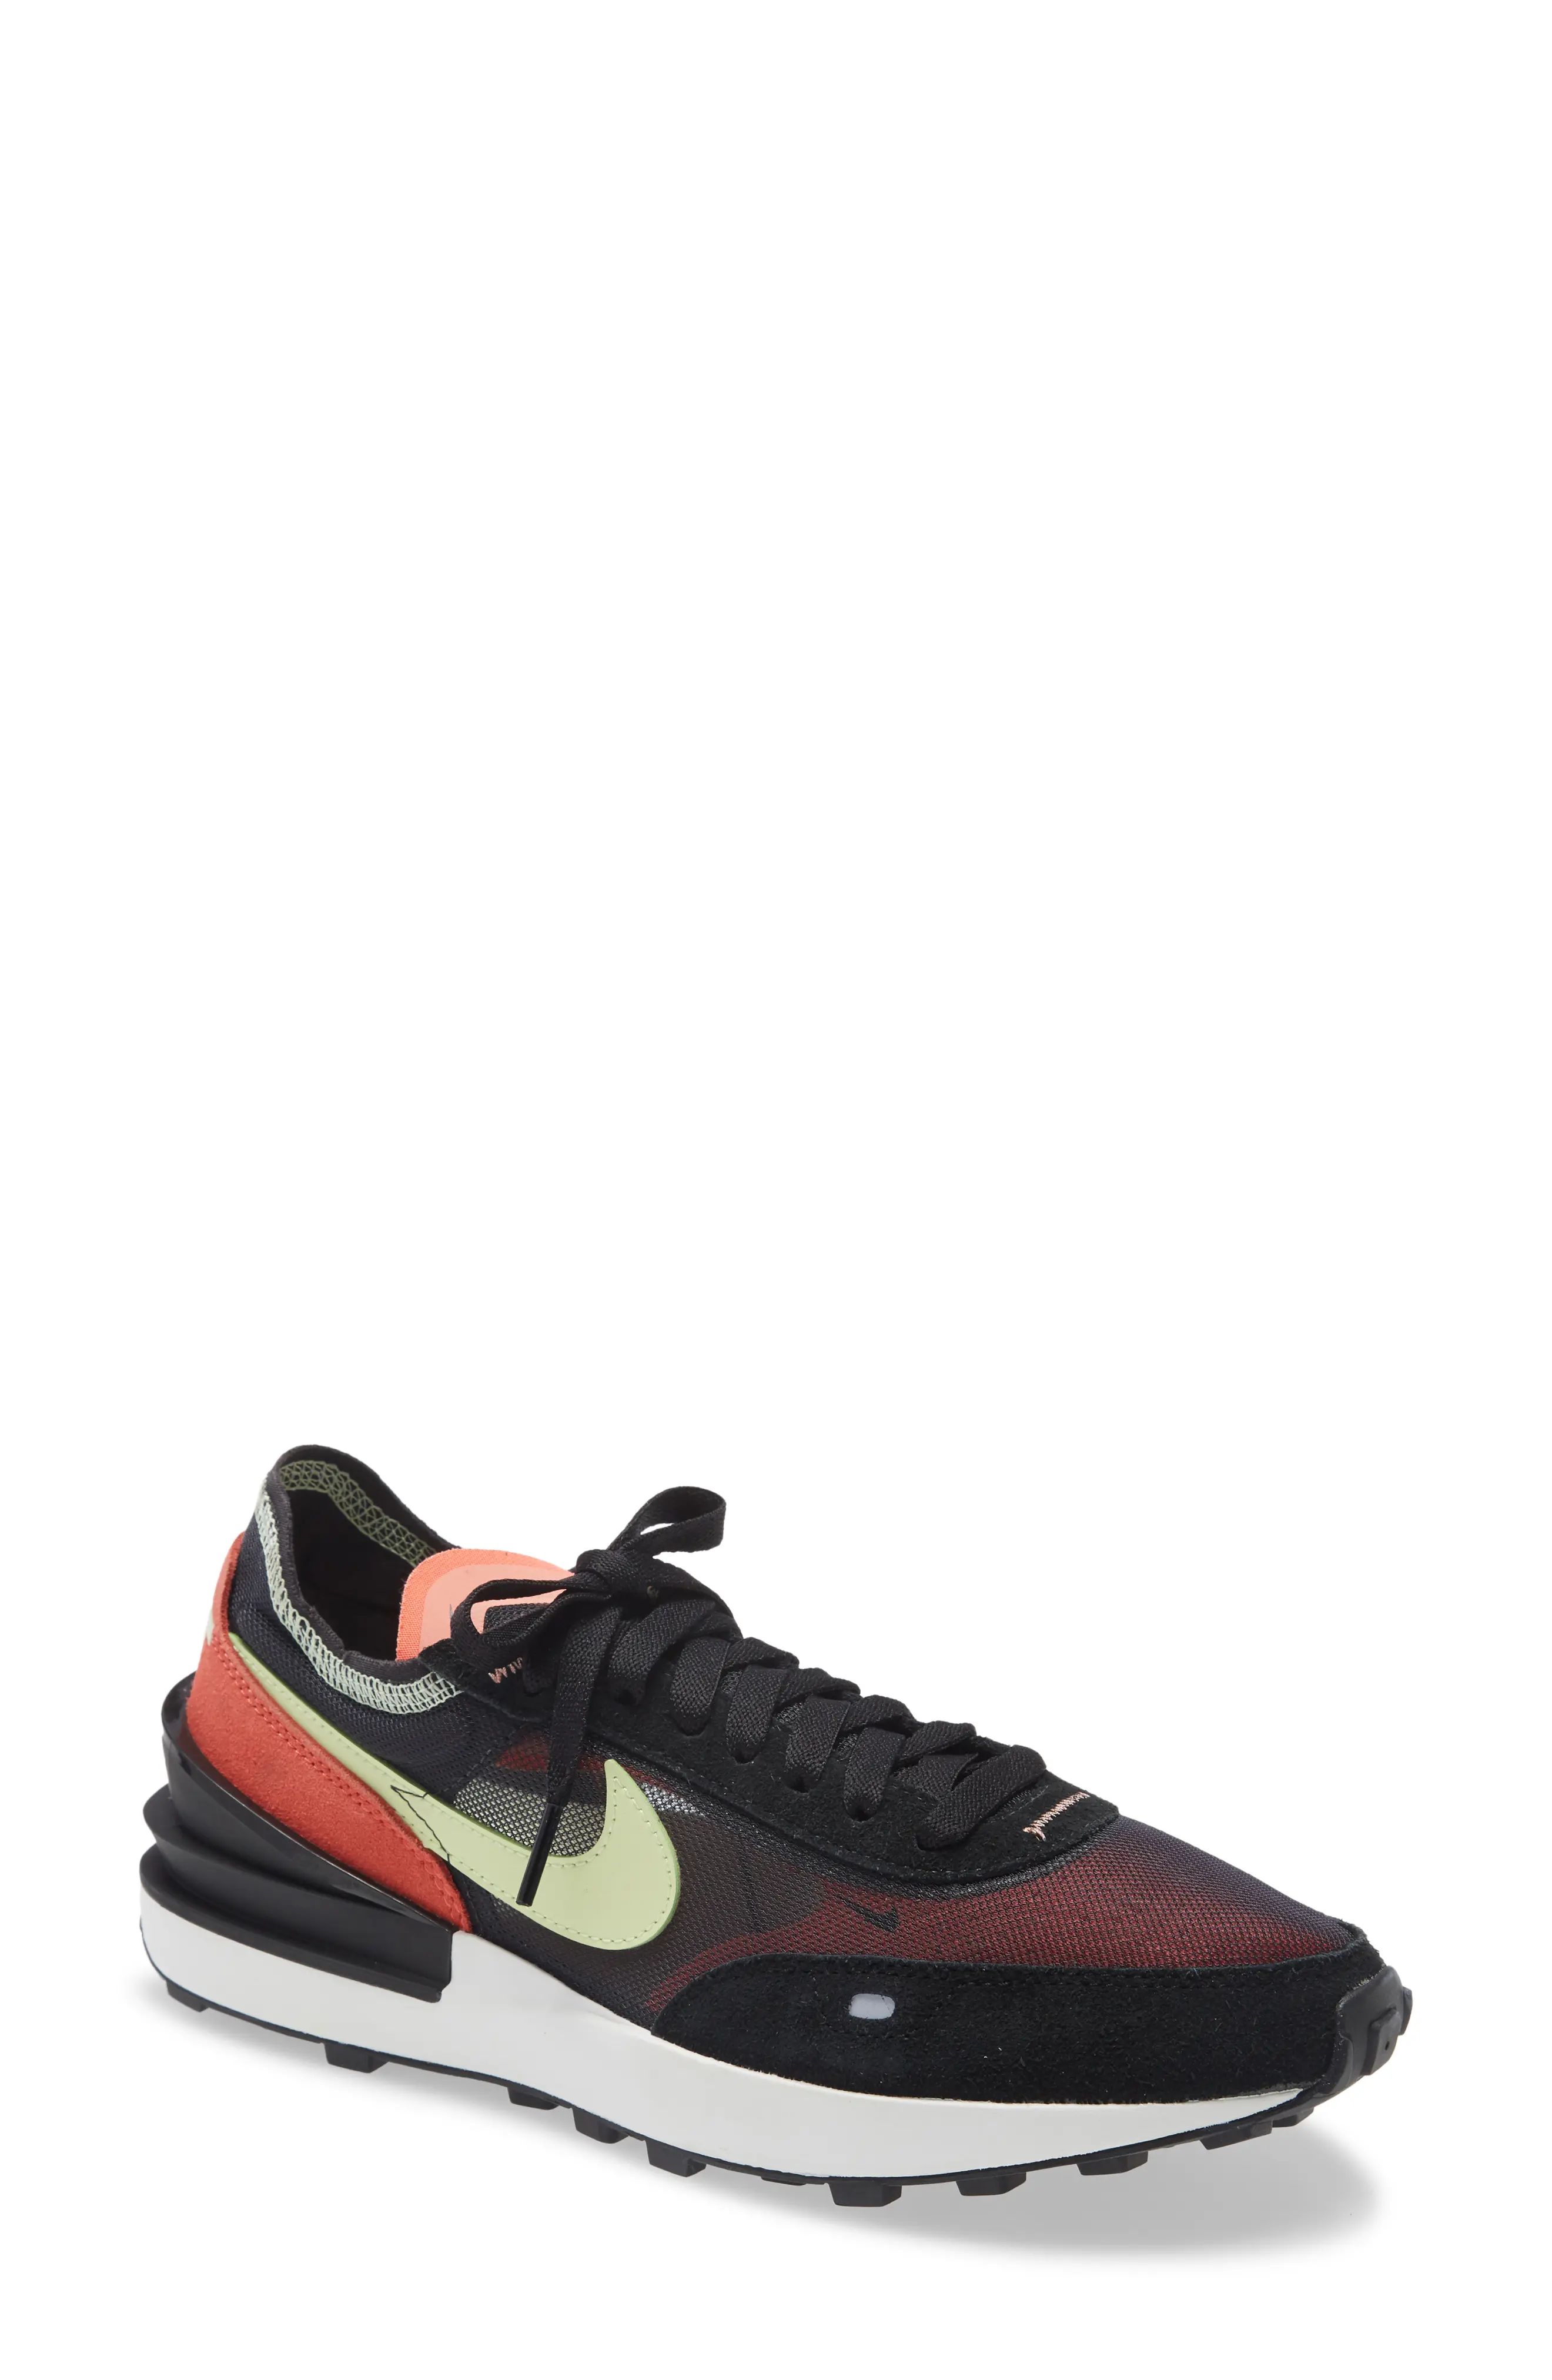 Nike Waffle One Sneaker, Size 10 in Black/Lime Ice/Magic Ember at Nordstrom | Nordstrom